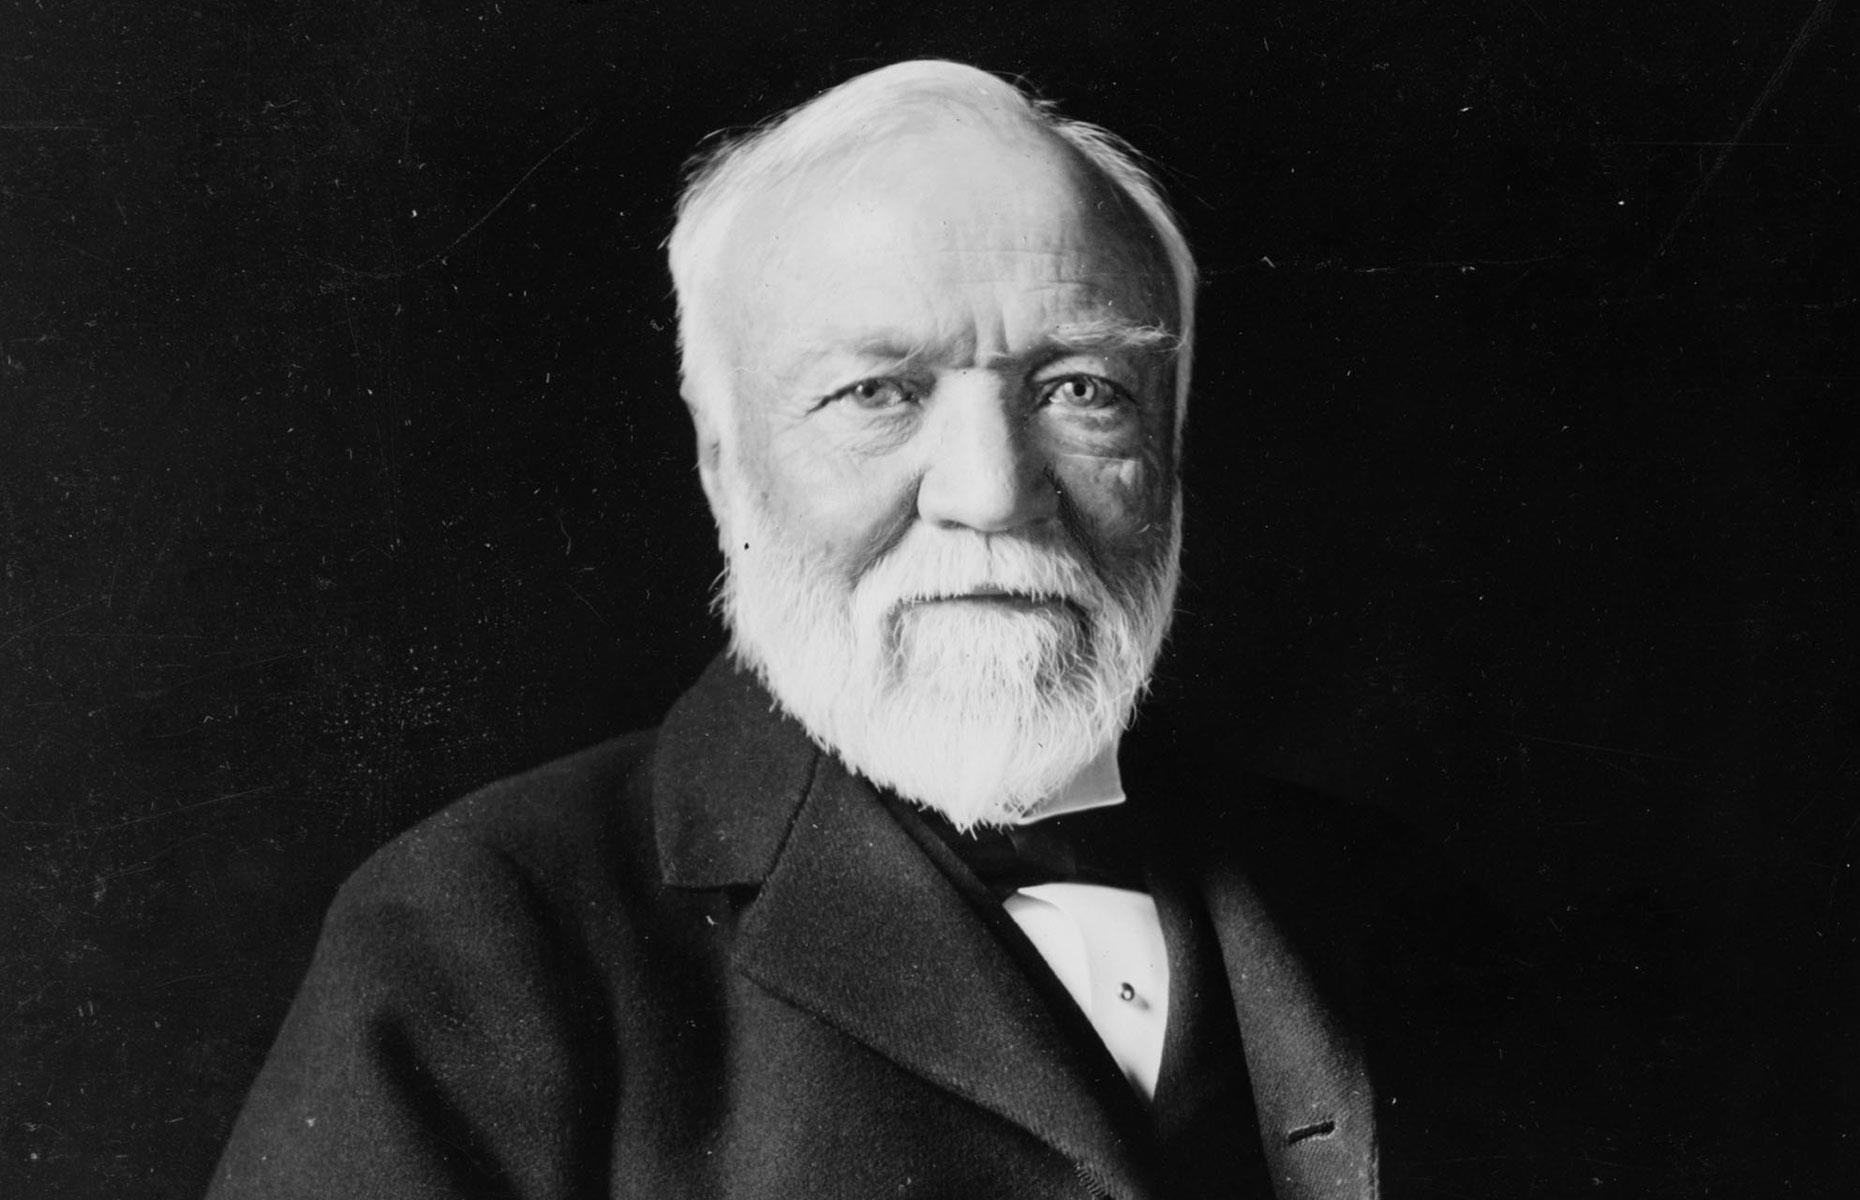 <p>Originally born in Dunfermline, Scotland in 1835, Andrew Carnegie had risen to fame and fortune in the United States by the turn of the century. Having spearheaded the expansion of the American steel industry, Carnegie accrued a fortune which would have equated to hundreds of billions of dollars in today’s money.</p>  <p>A philanthropist as well as an industrialist, Carnegie gave away nearly 90% of his fortune in the final 18 years of his life to various charities, foundations, and universities, and called upon others to do the same.</p>